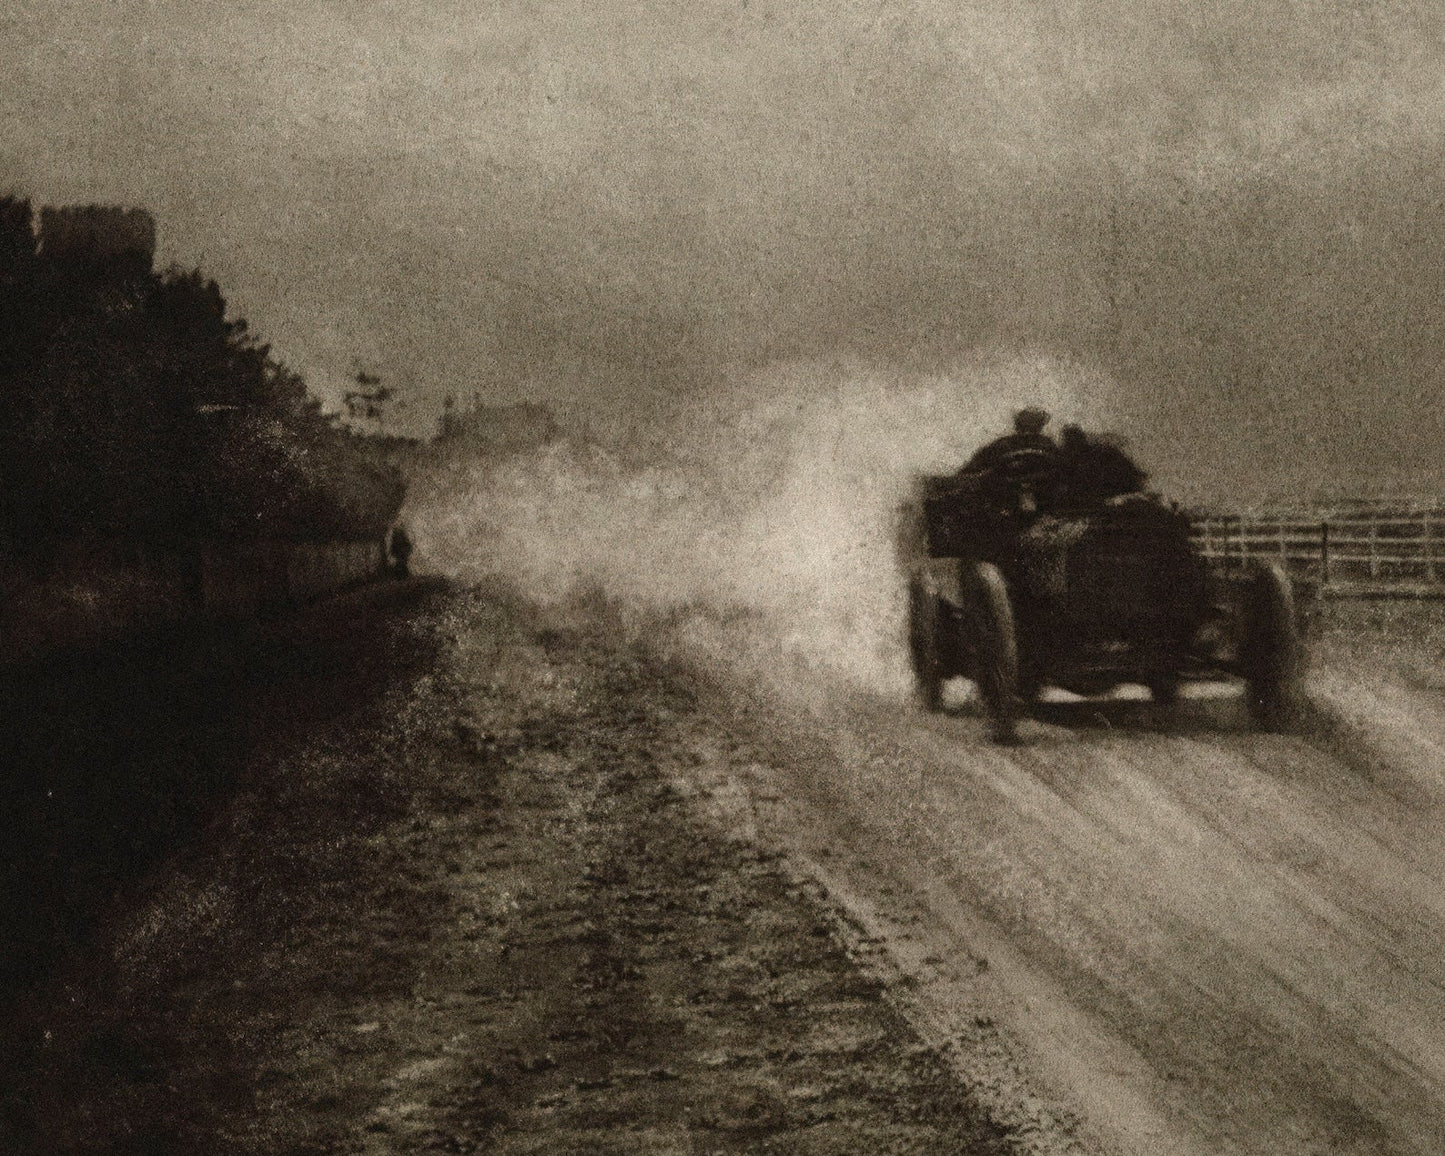 Vintage Photograph "Speed" by Robert Demachy (c.1904) - Mabon Gallery